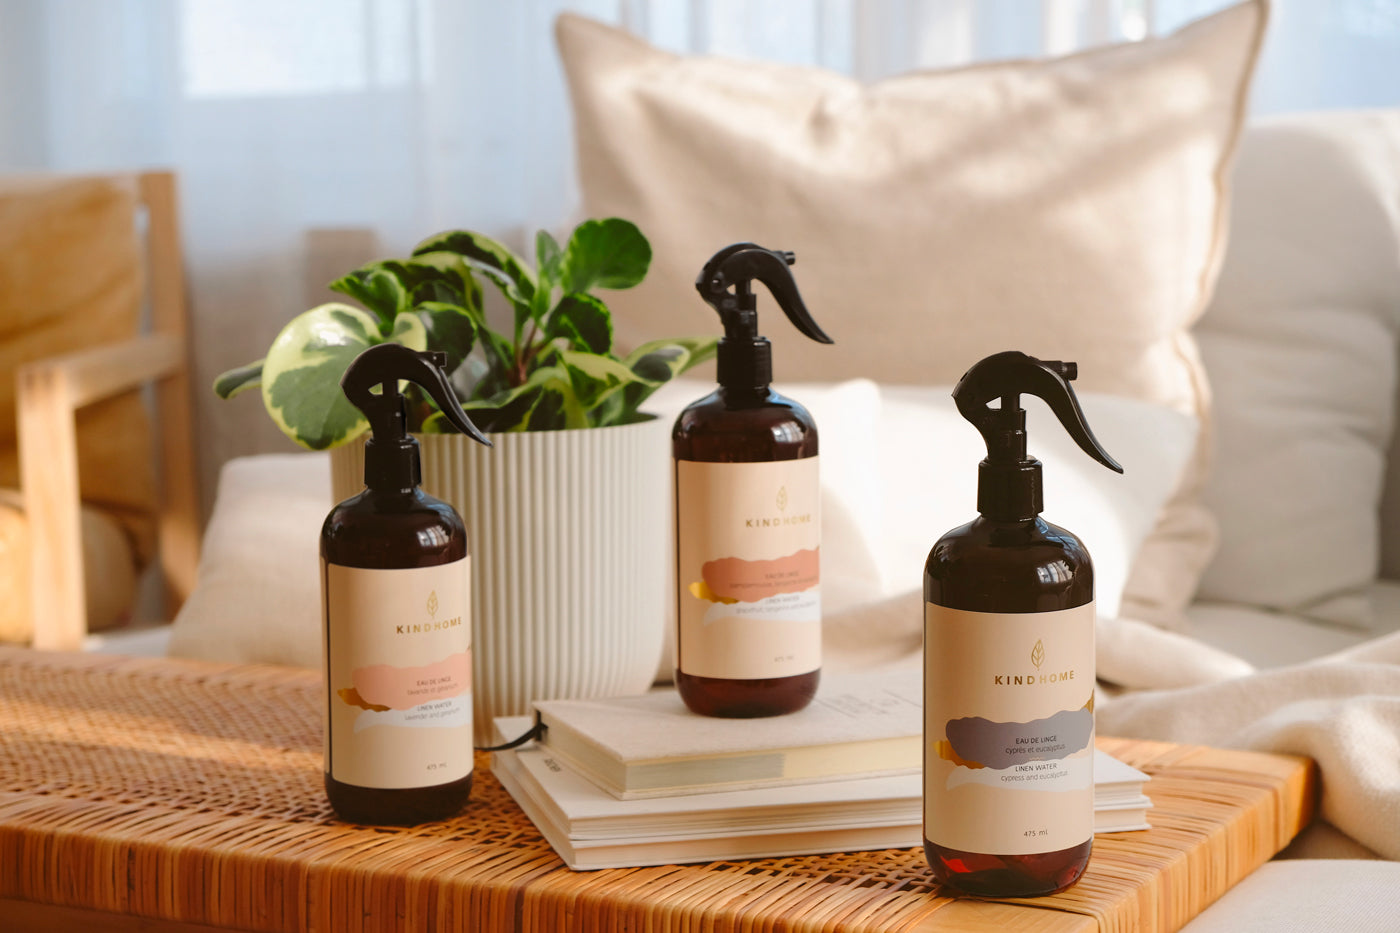 This company is offering free household products for your spring cleaning